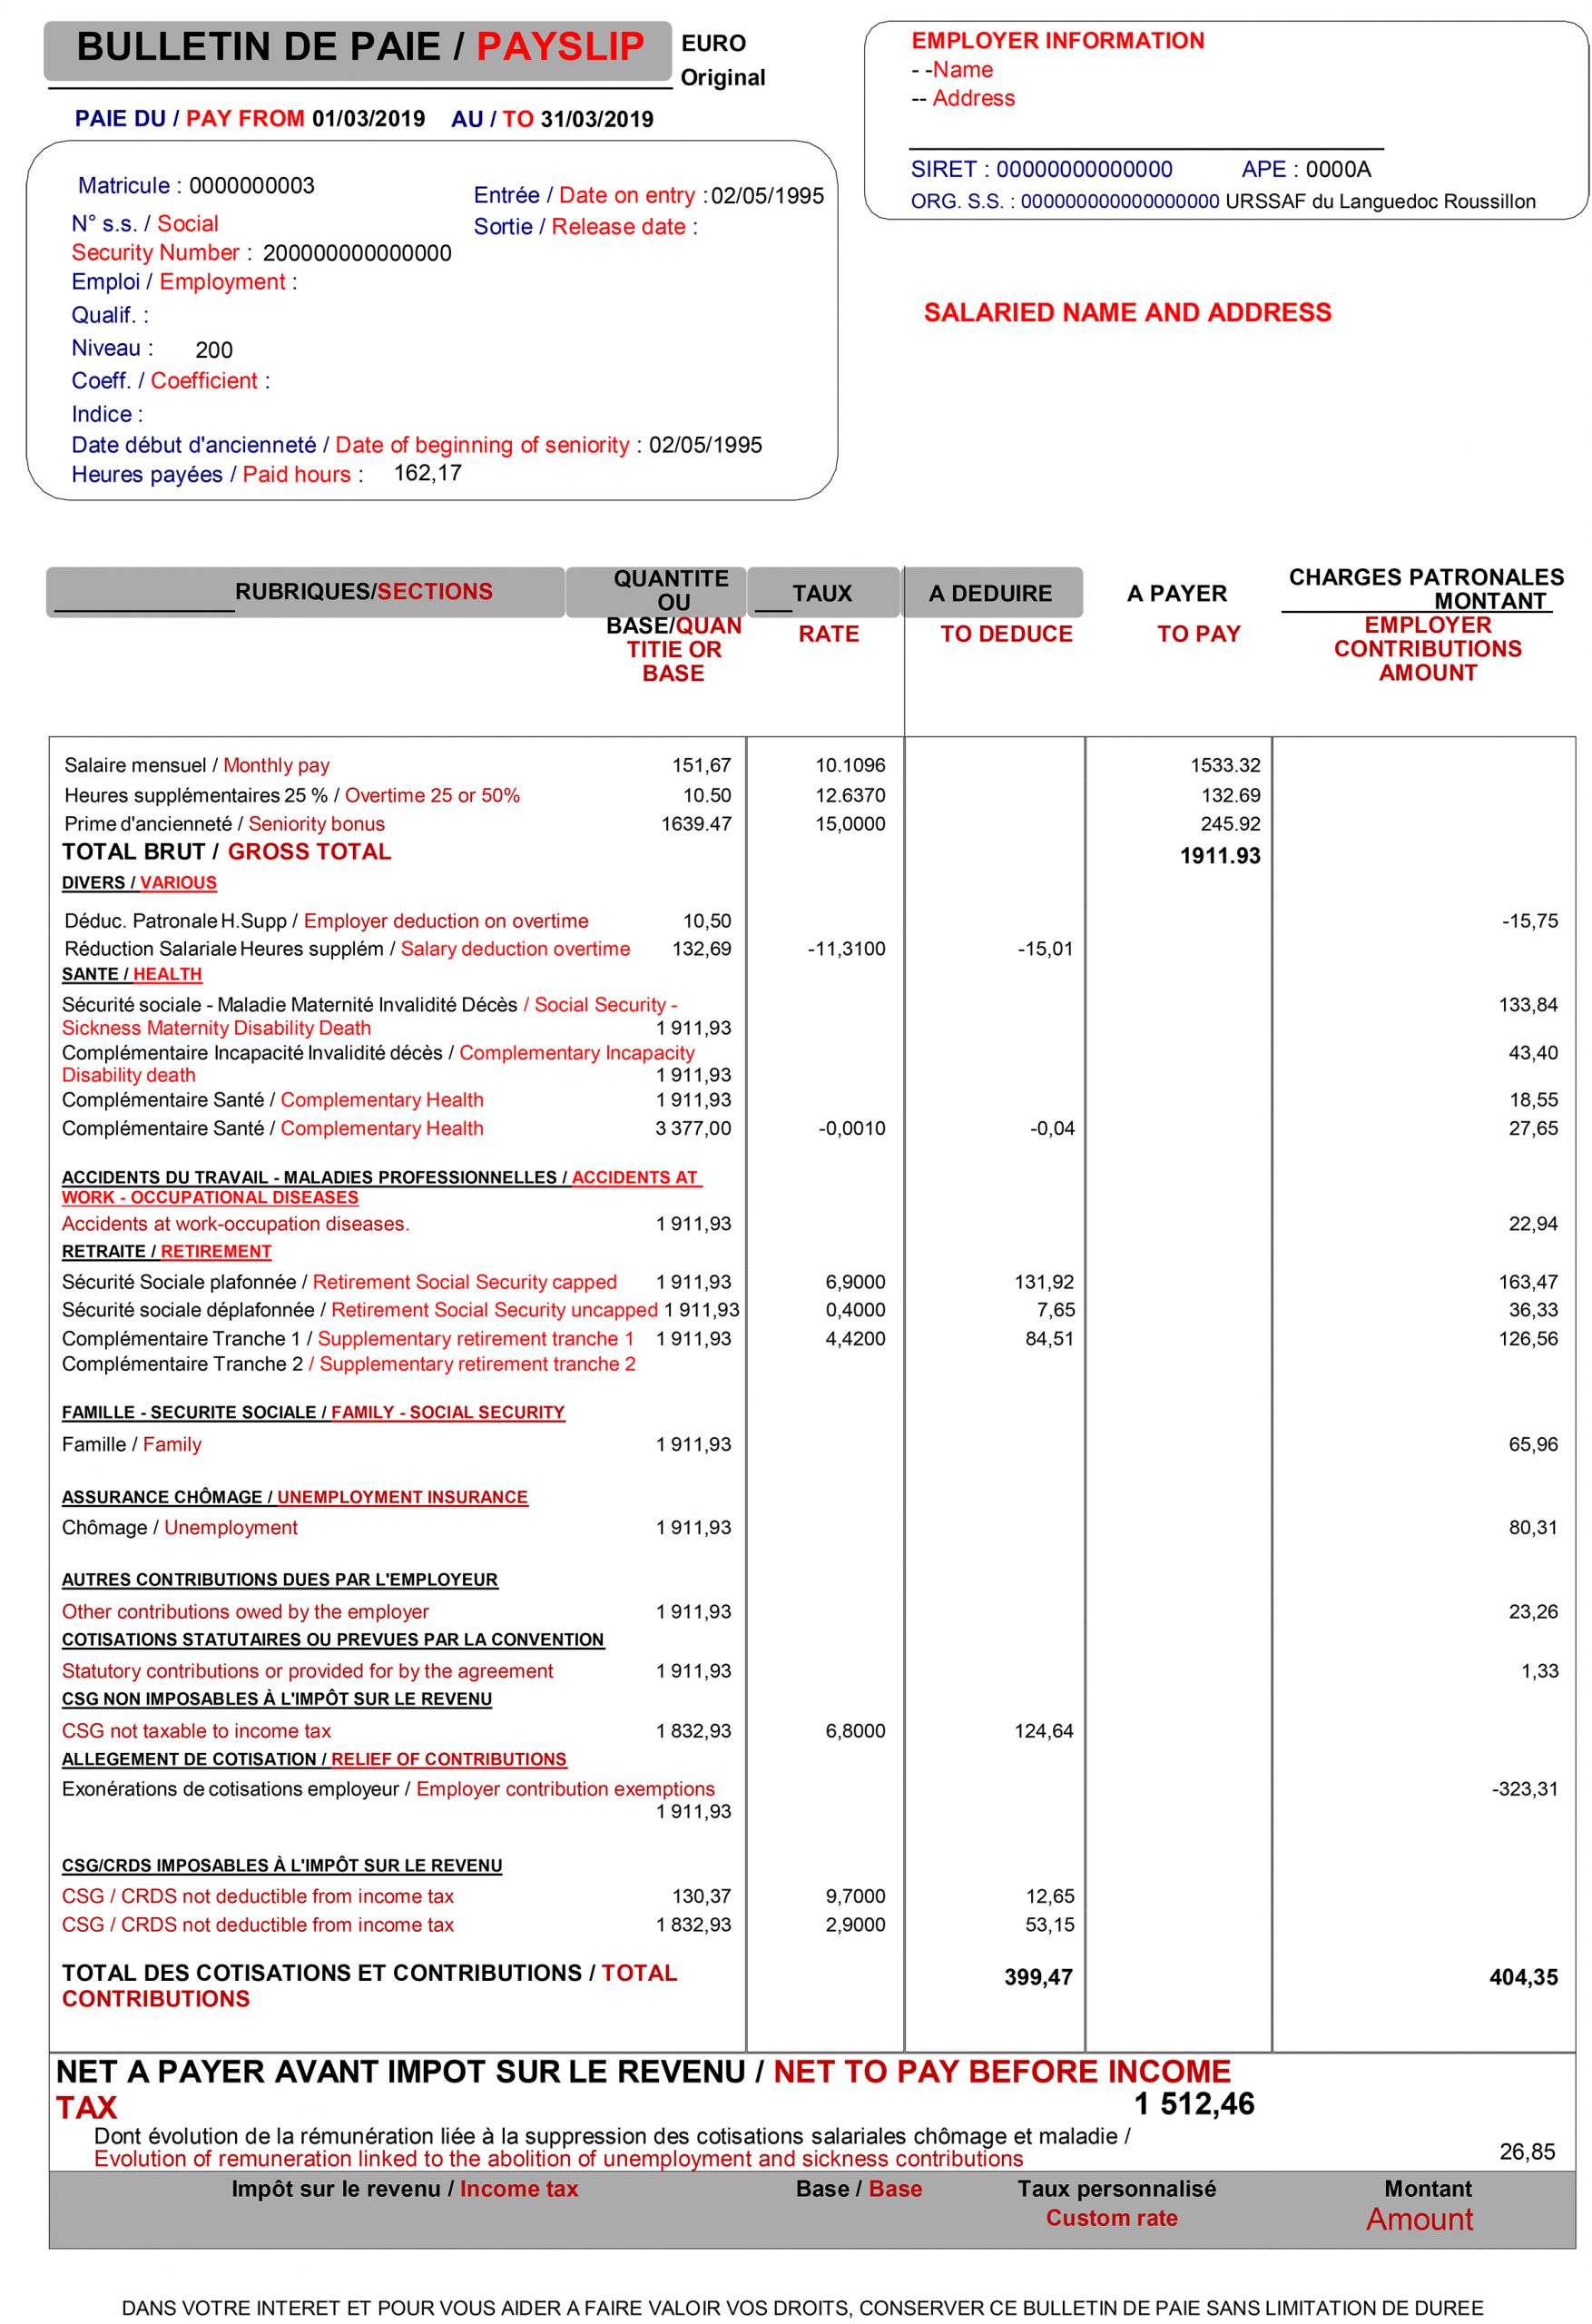 French payslip translated into English 1